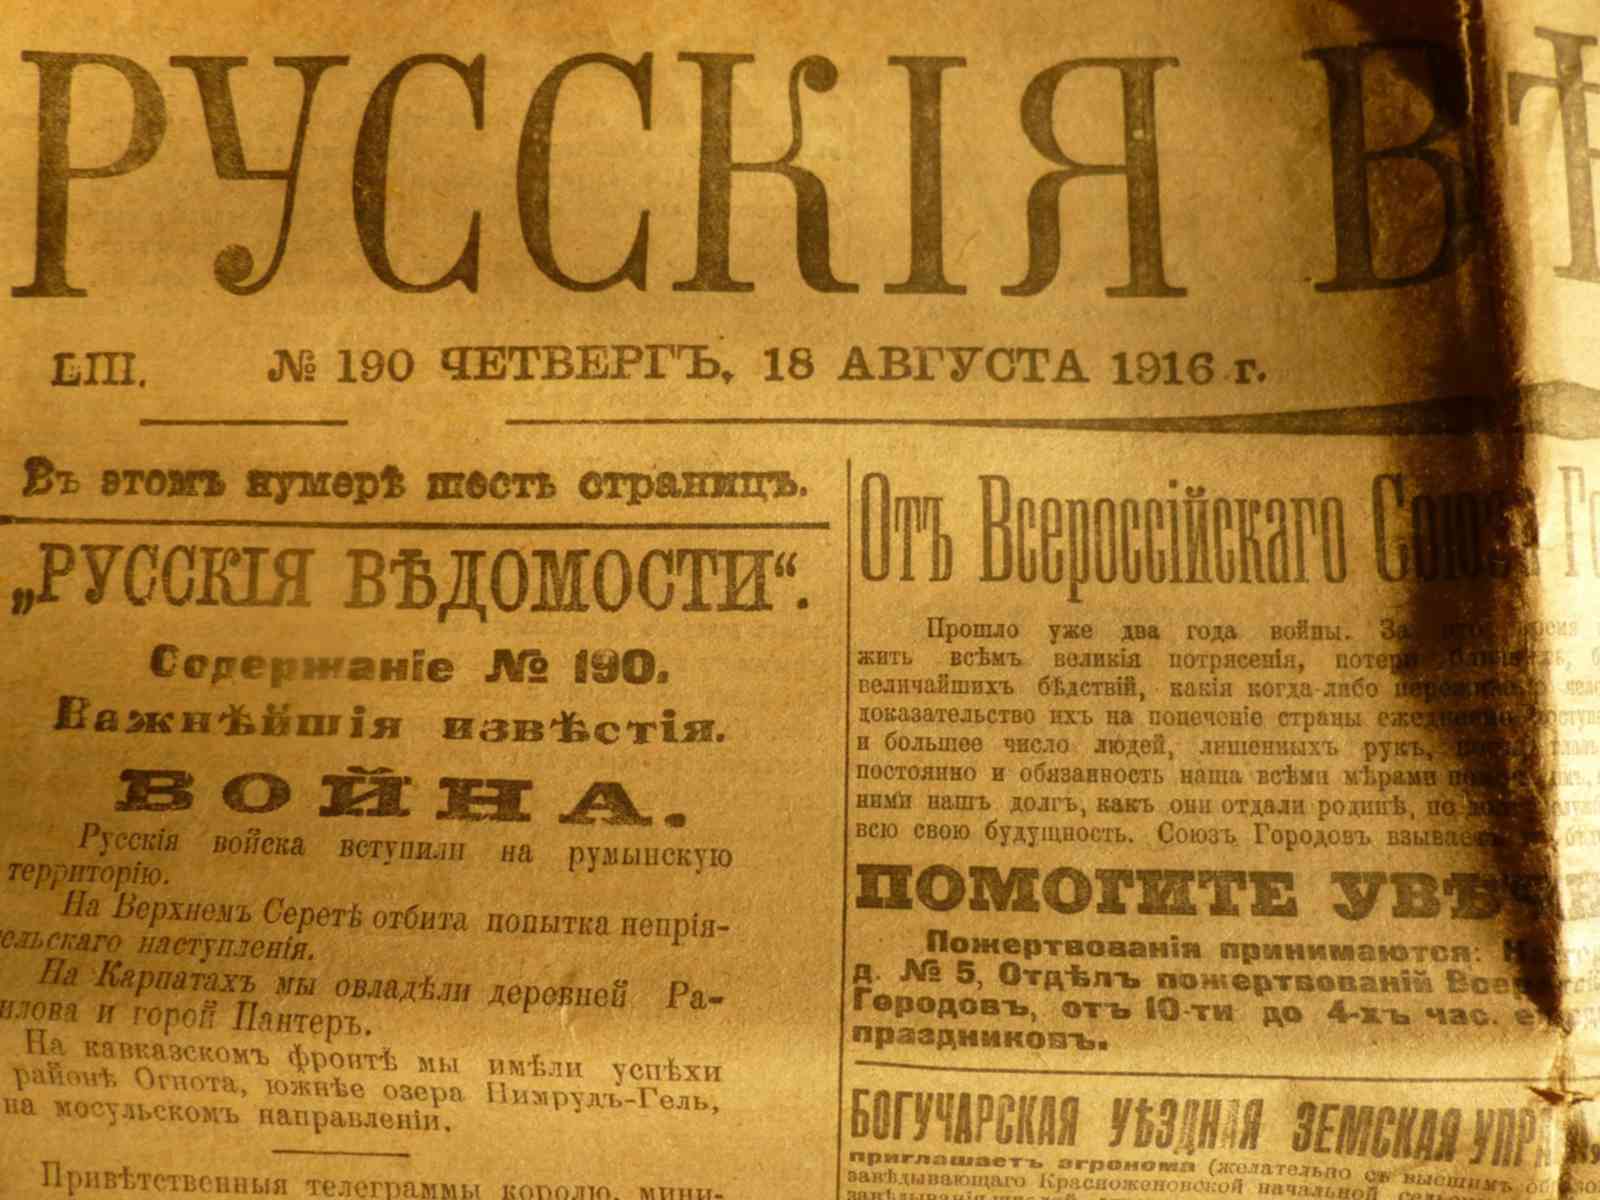 First newspapers. Газета ведомости. Русские ведомости газета. Первые русские газеты. Газета 1916 года.